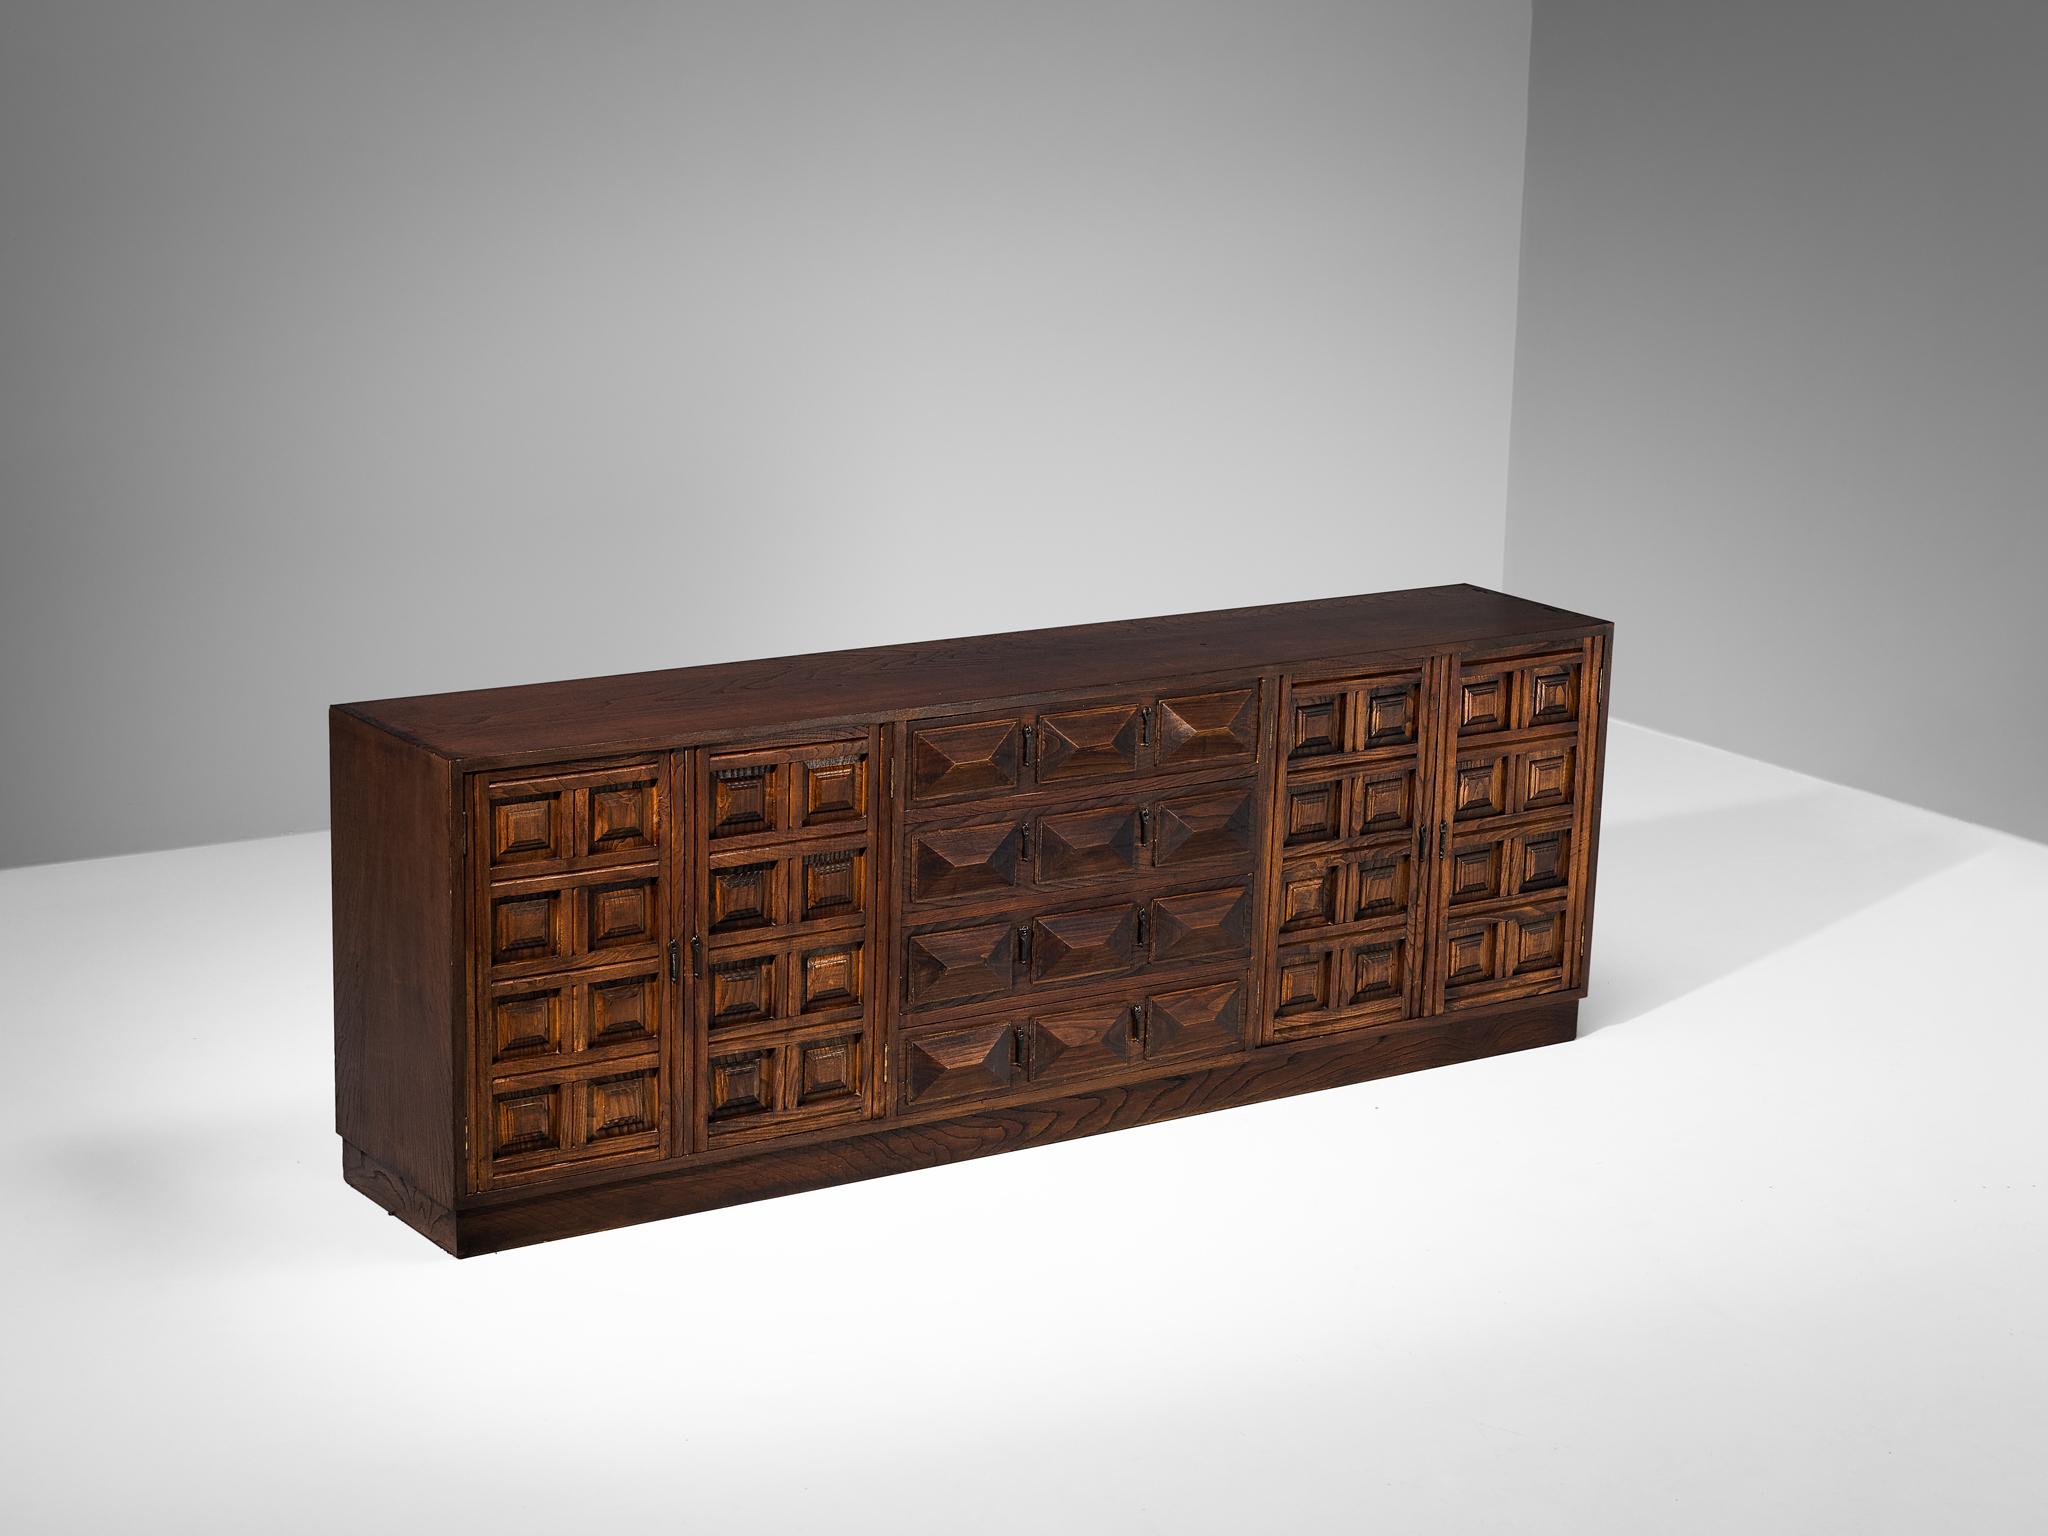 Sideboard, stained ash, iron, Spain, 1970s

This cabinet originates from Spain and shows the decorative characteristics of the 16th century Castilian furniture design. The carved geometric shapes on the door panels immediately catch the eye and